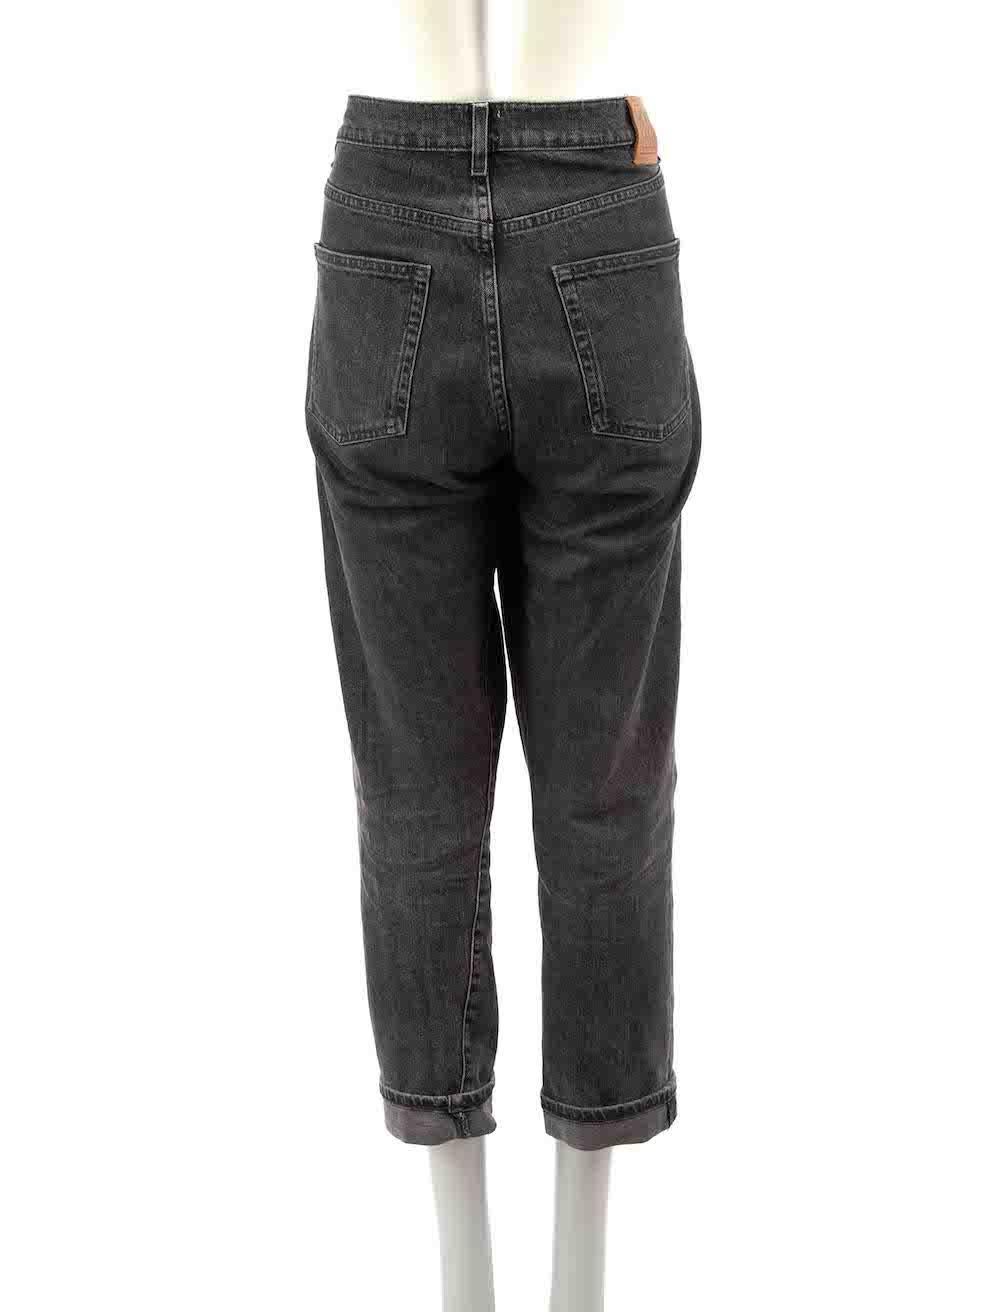 Totême Black Denim Washed Straight Leg Jeans Size L In Excellent Condition For Sale In London, GB